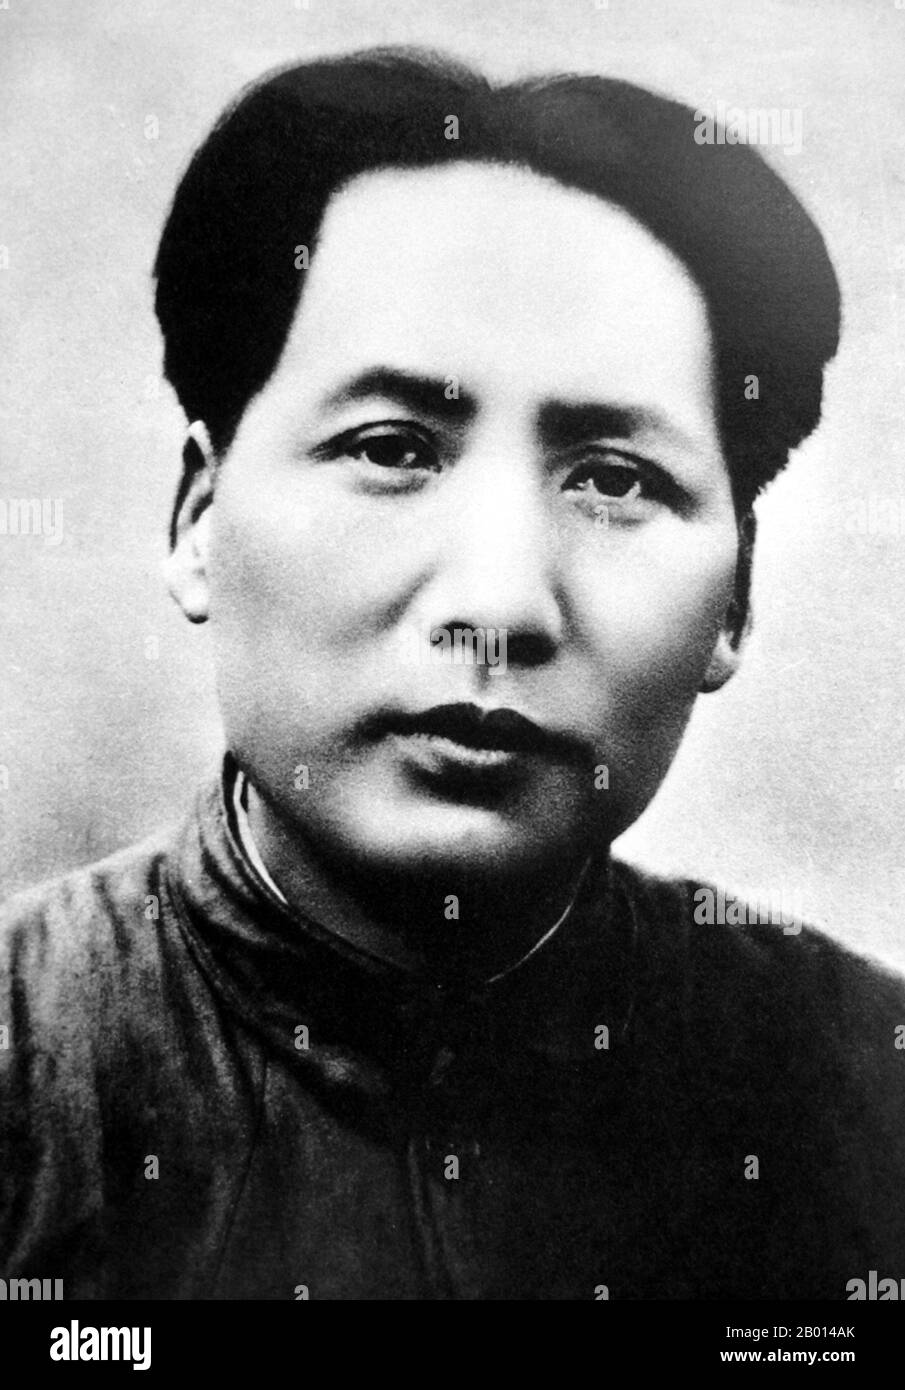 China: Mao Zedong (26 December 1893  – 9 September 1976), Chairman of the People's Republic of China, c. 1937.  Mao Zedong, also transliterated as Mao Tse-tung, was a Chinese communist revolutionary, guerrilla warfare strategist, author, political theorist, and leader of the Chinese Revolution. Commonly referred to as Chairman Mao, he was the architect of the People's Republic of China (PRC) from its establishment in 1949, and held authoritarian control over the nation until his death in 1976. His theoretical contribution to Marxism-Leninism was collectively known as Maoism. Stock Photo